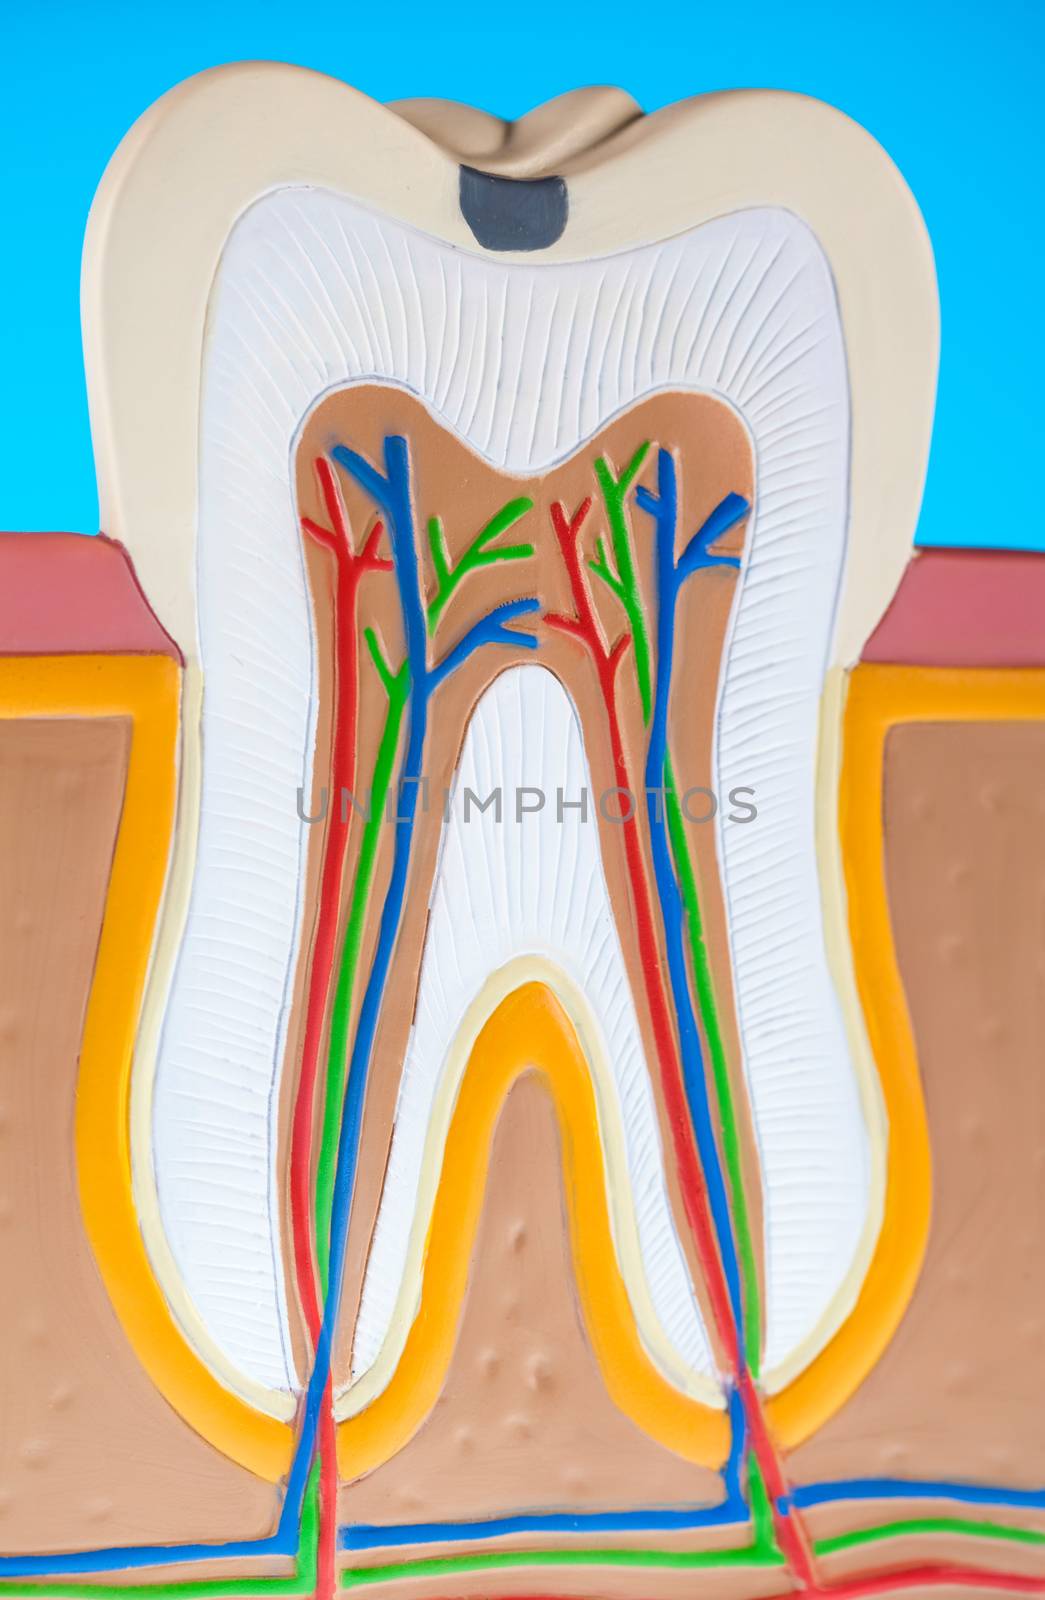 Tooth anatomy, bright colorful tone concept by JanPietruszka